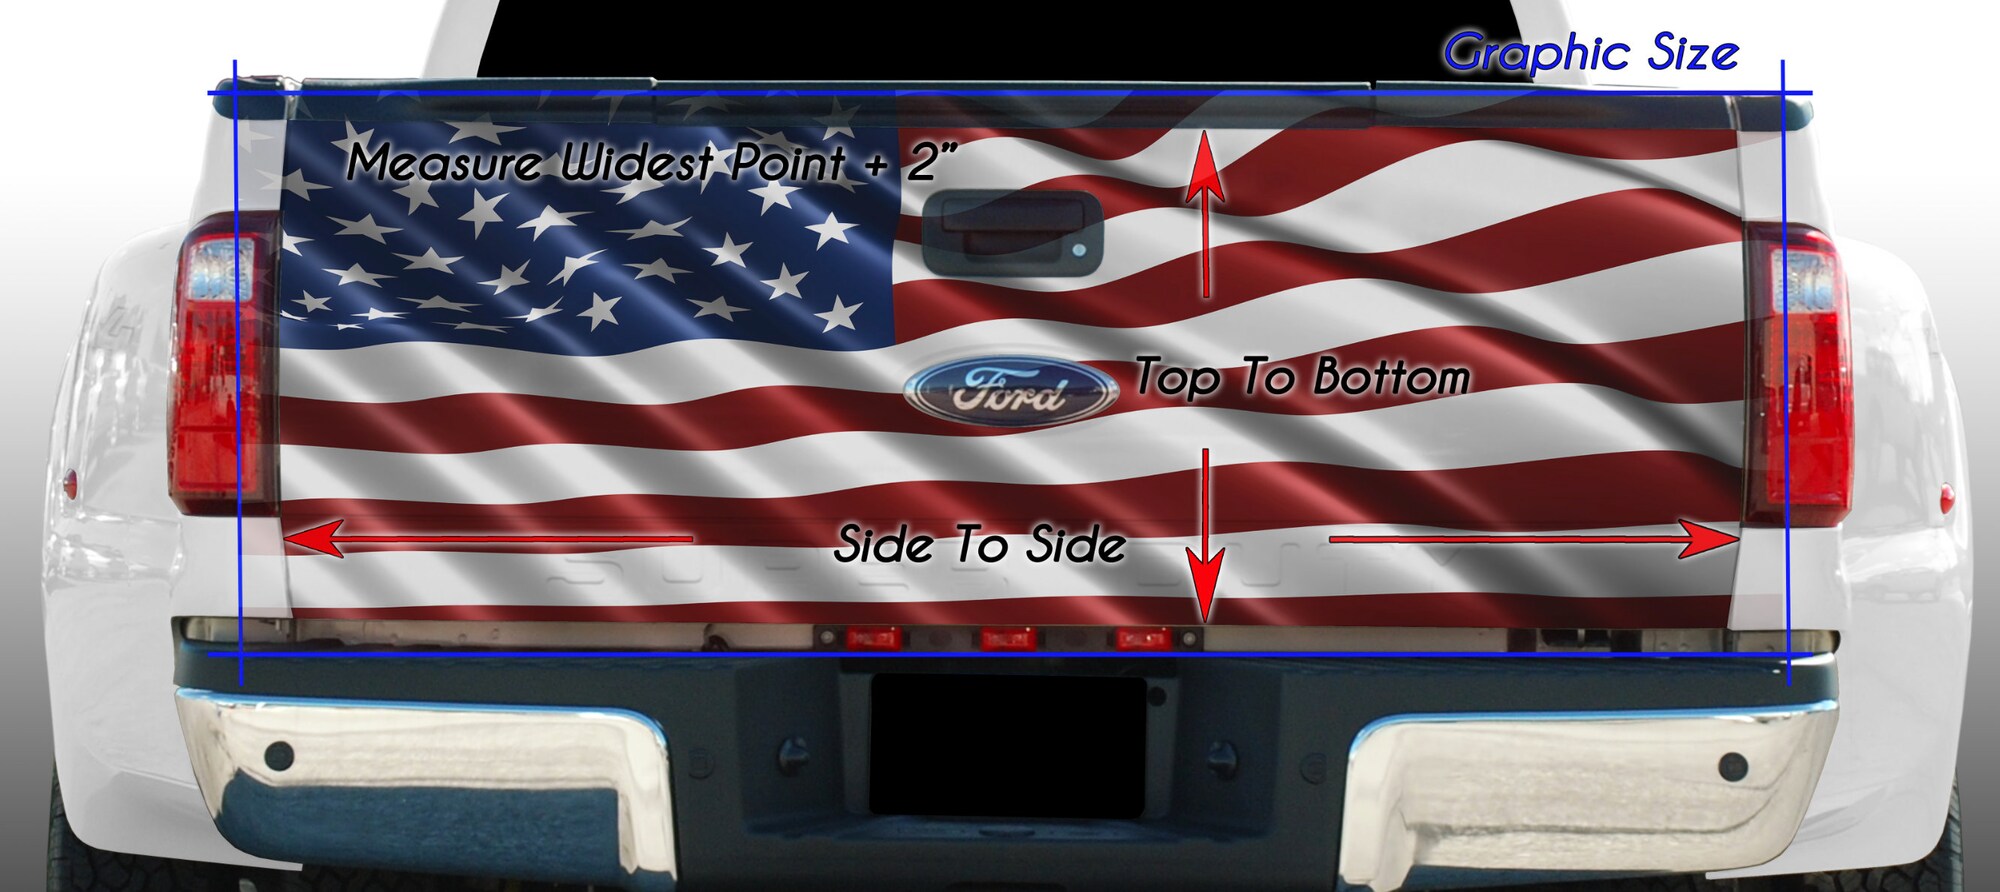 American Flag Eagle and POW MIA Tailgate Truck Bed Decal